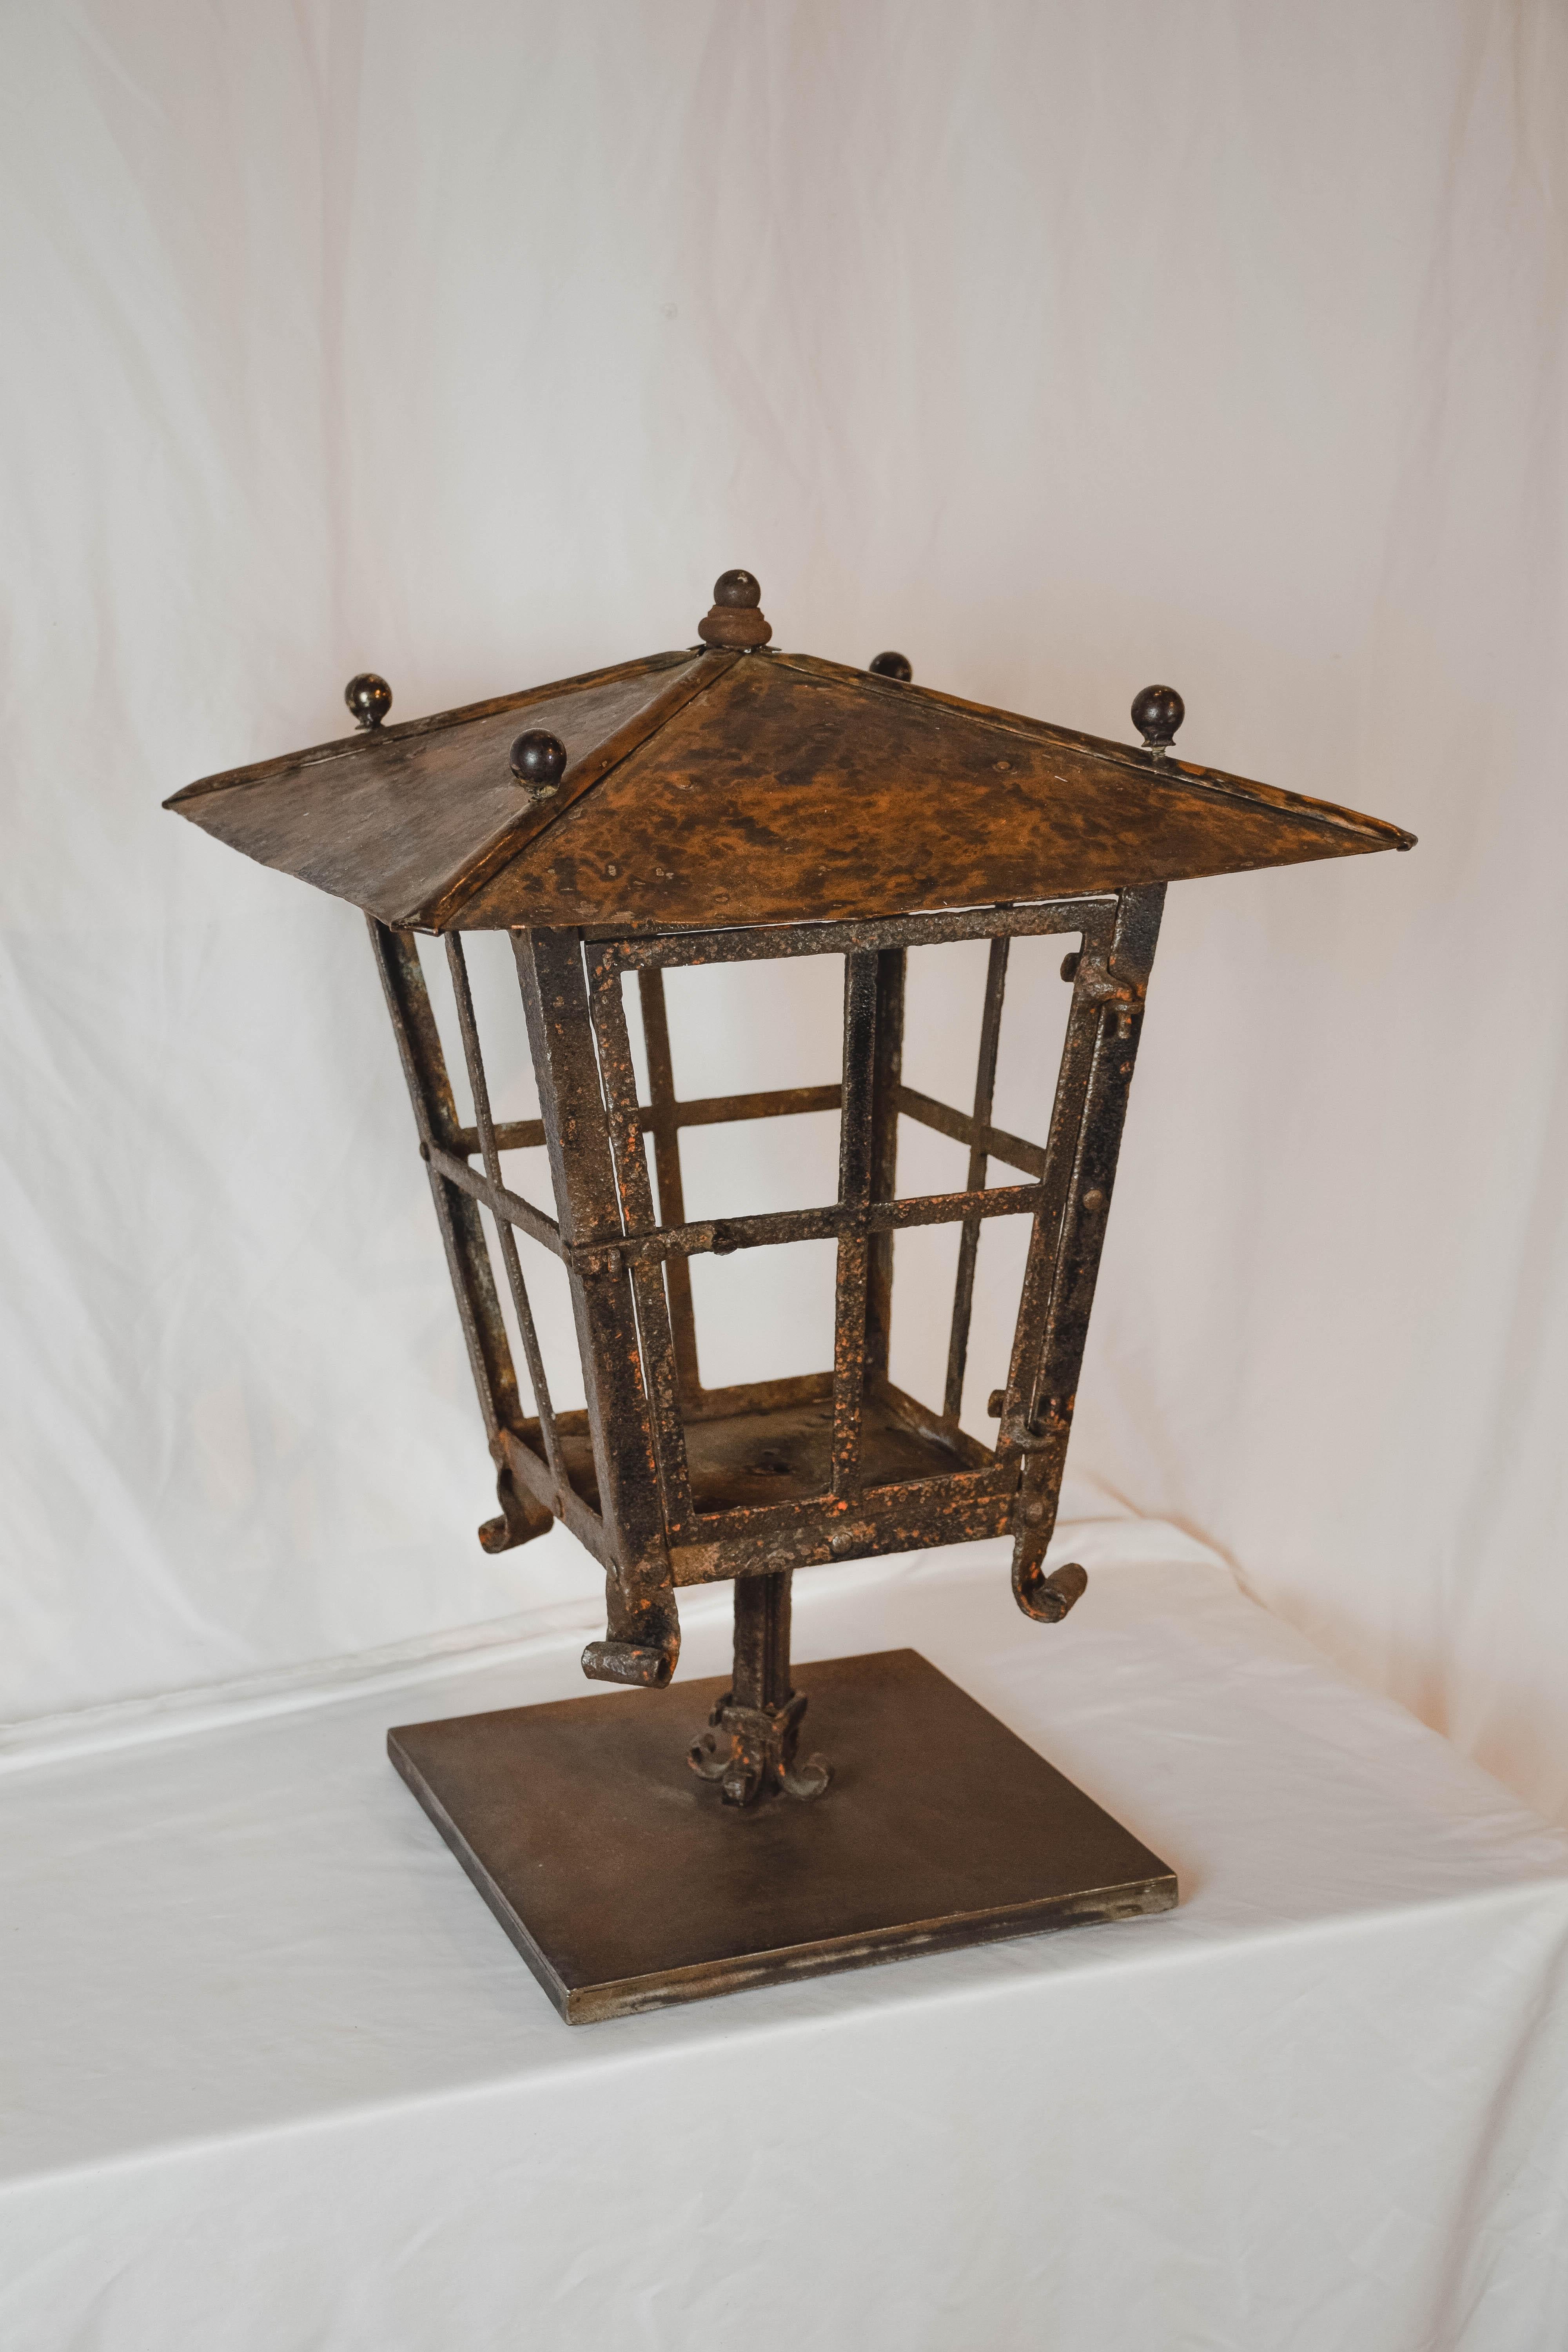 Charming French Antique copper lantern with metal base. The lantern, without glass, has a wonderful aged patina with some verdigris. Would look great with a large candle in it or could be converted into a table lamp. 

 